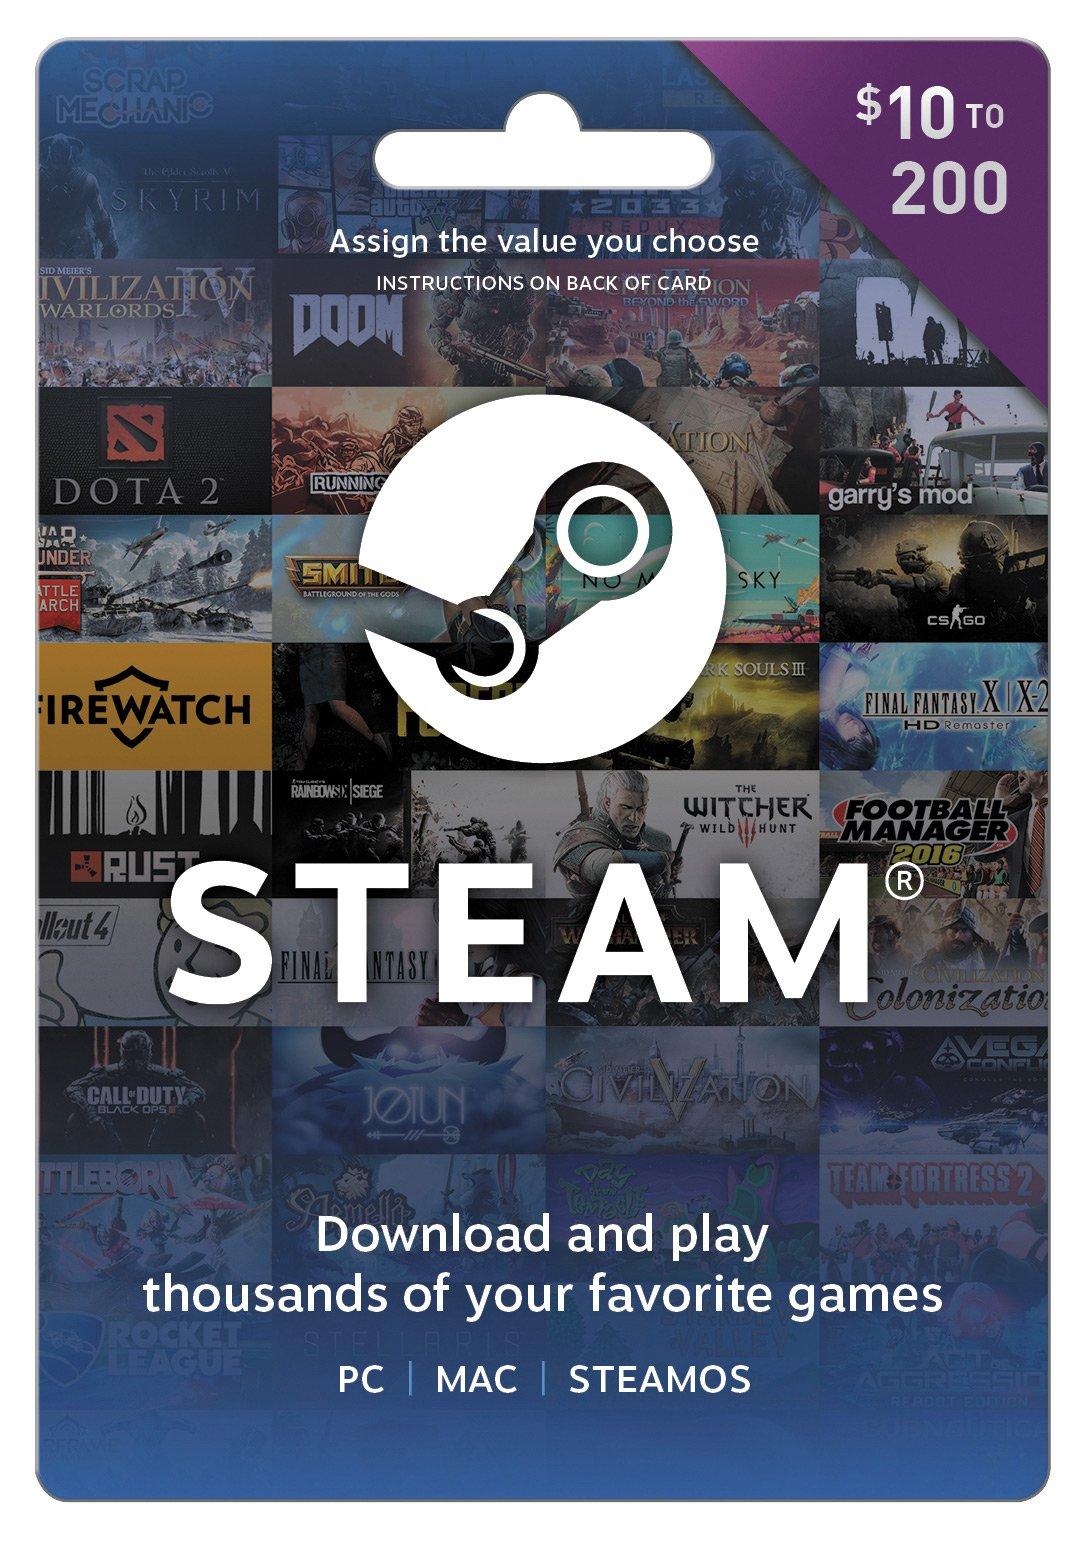 can you buy a steam gift card with a gamestop gift card